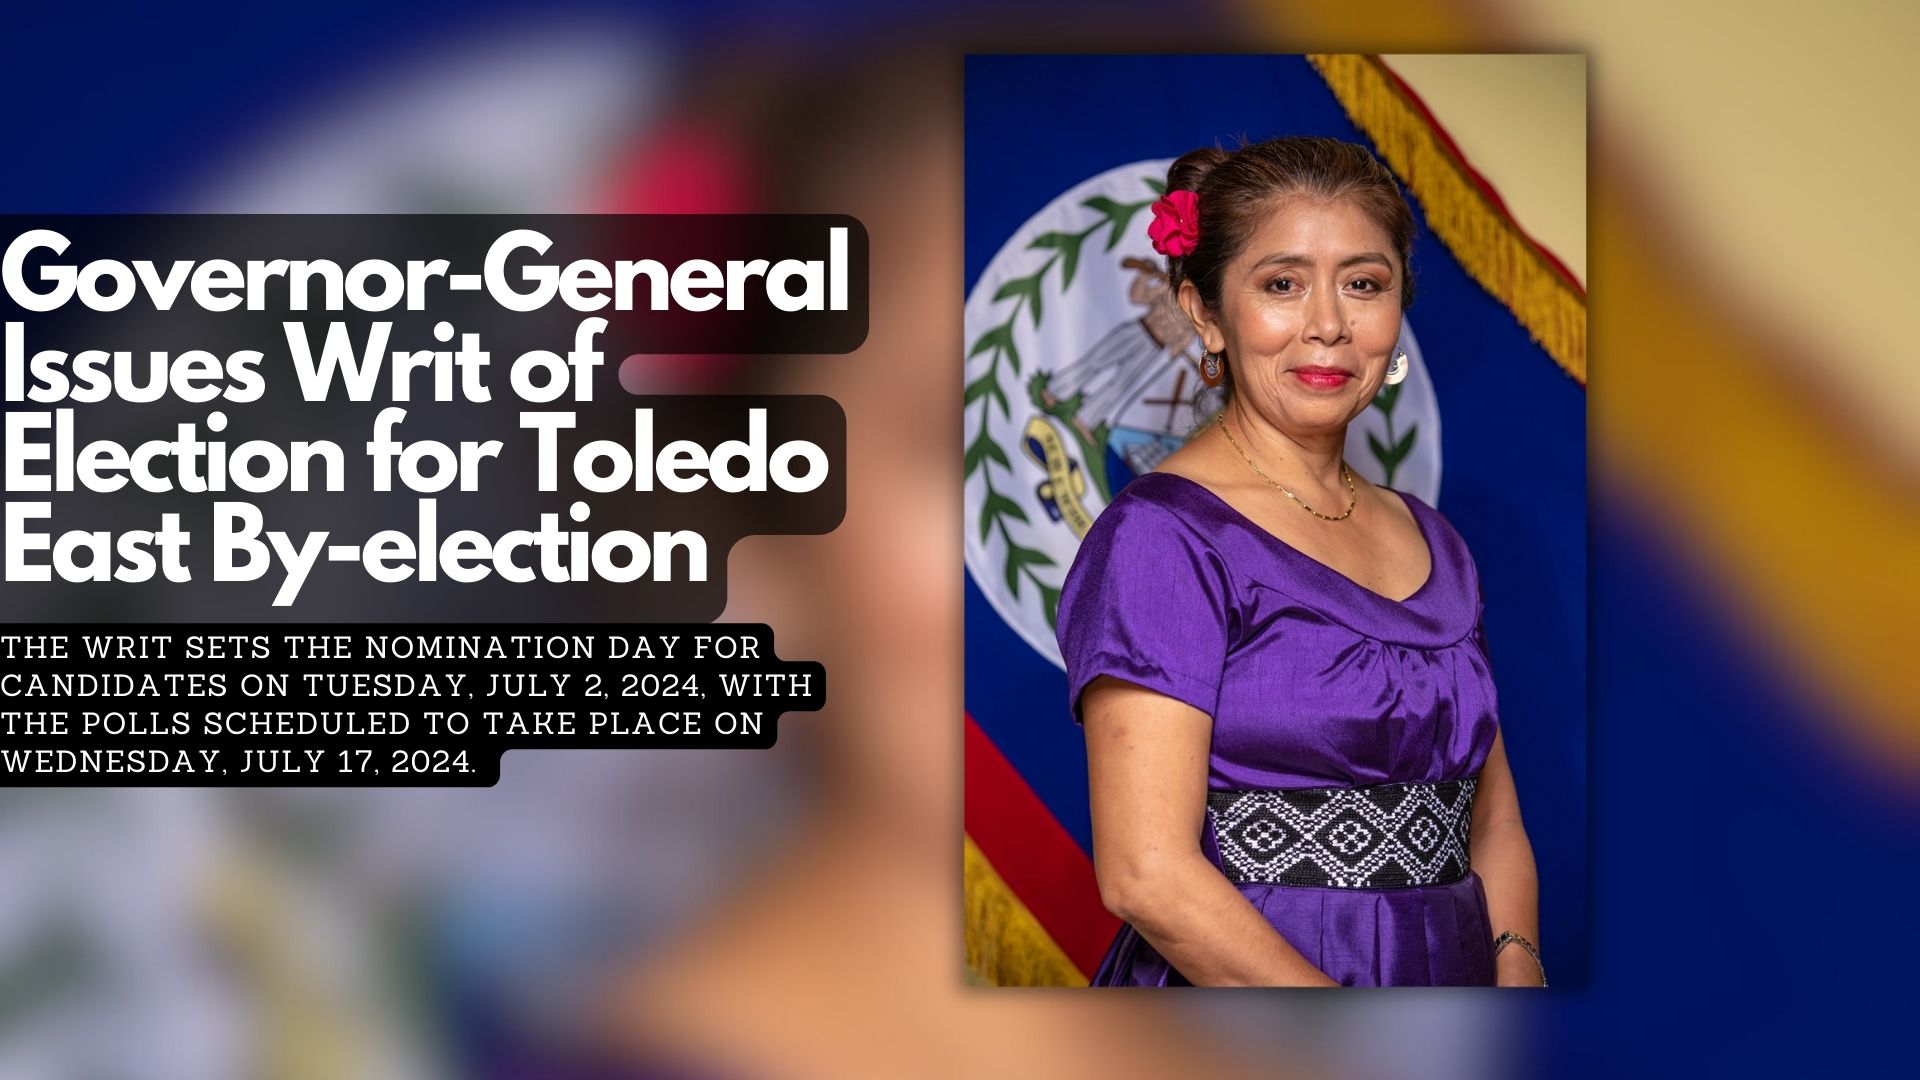 Governor-General Issues Writ of Election for Toledo East By-election